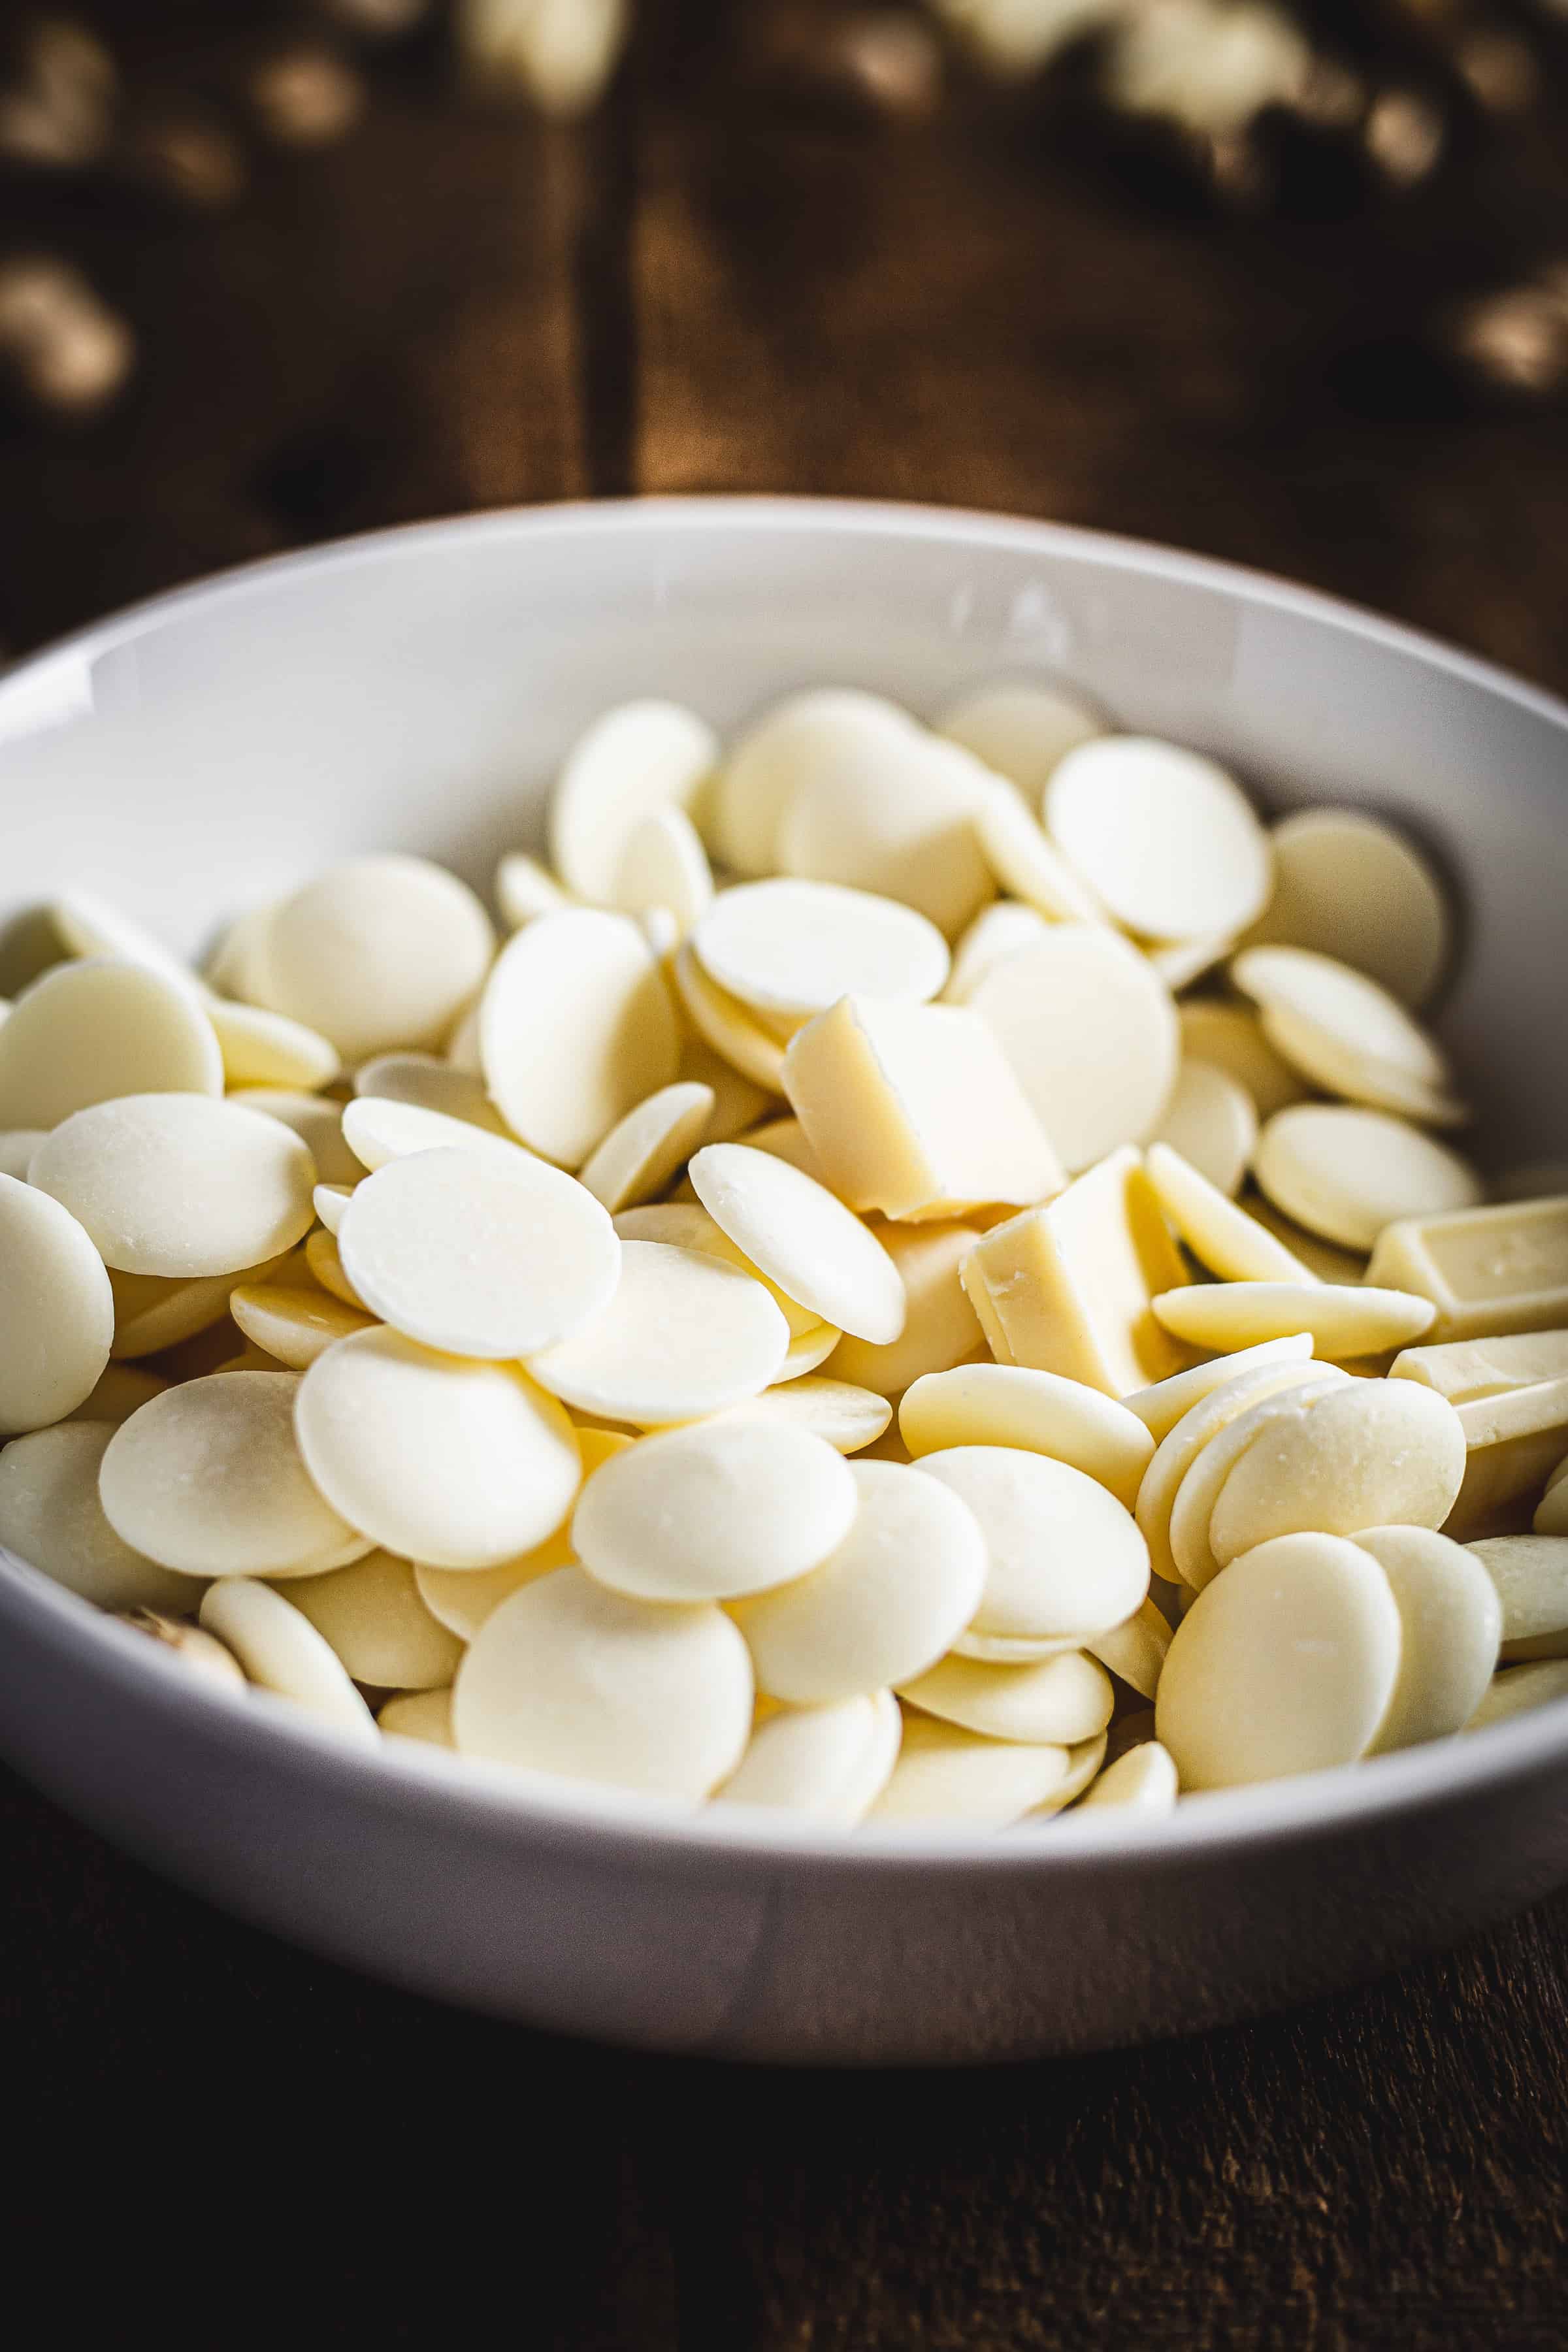 white chocolate pieces and wafers in a bowl